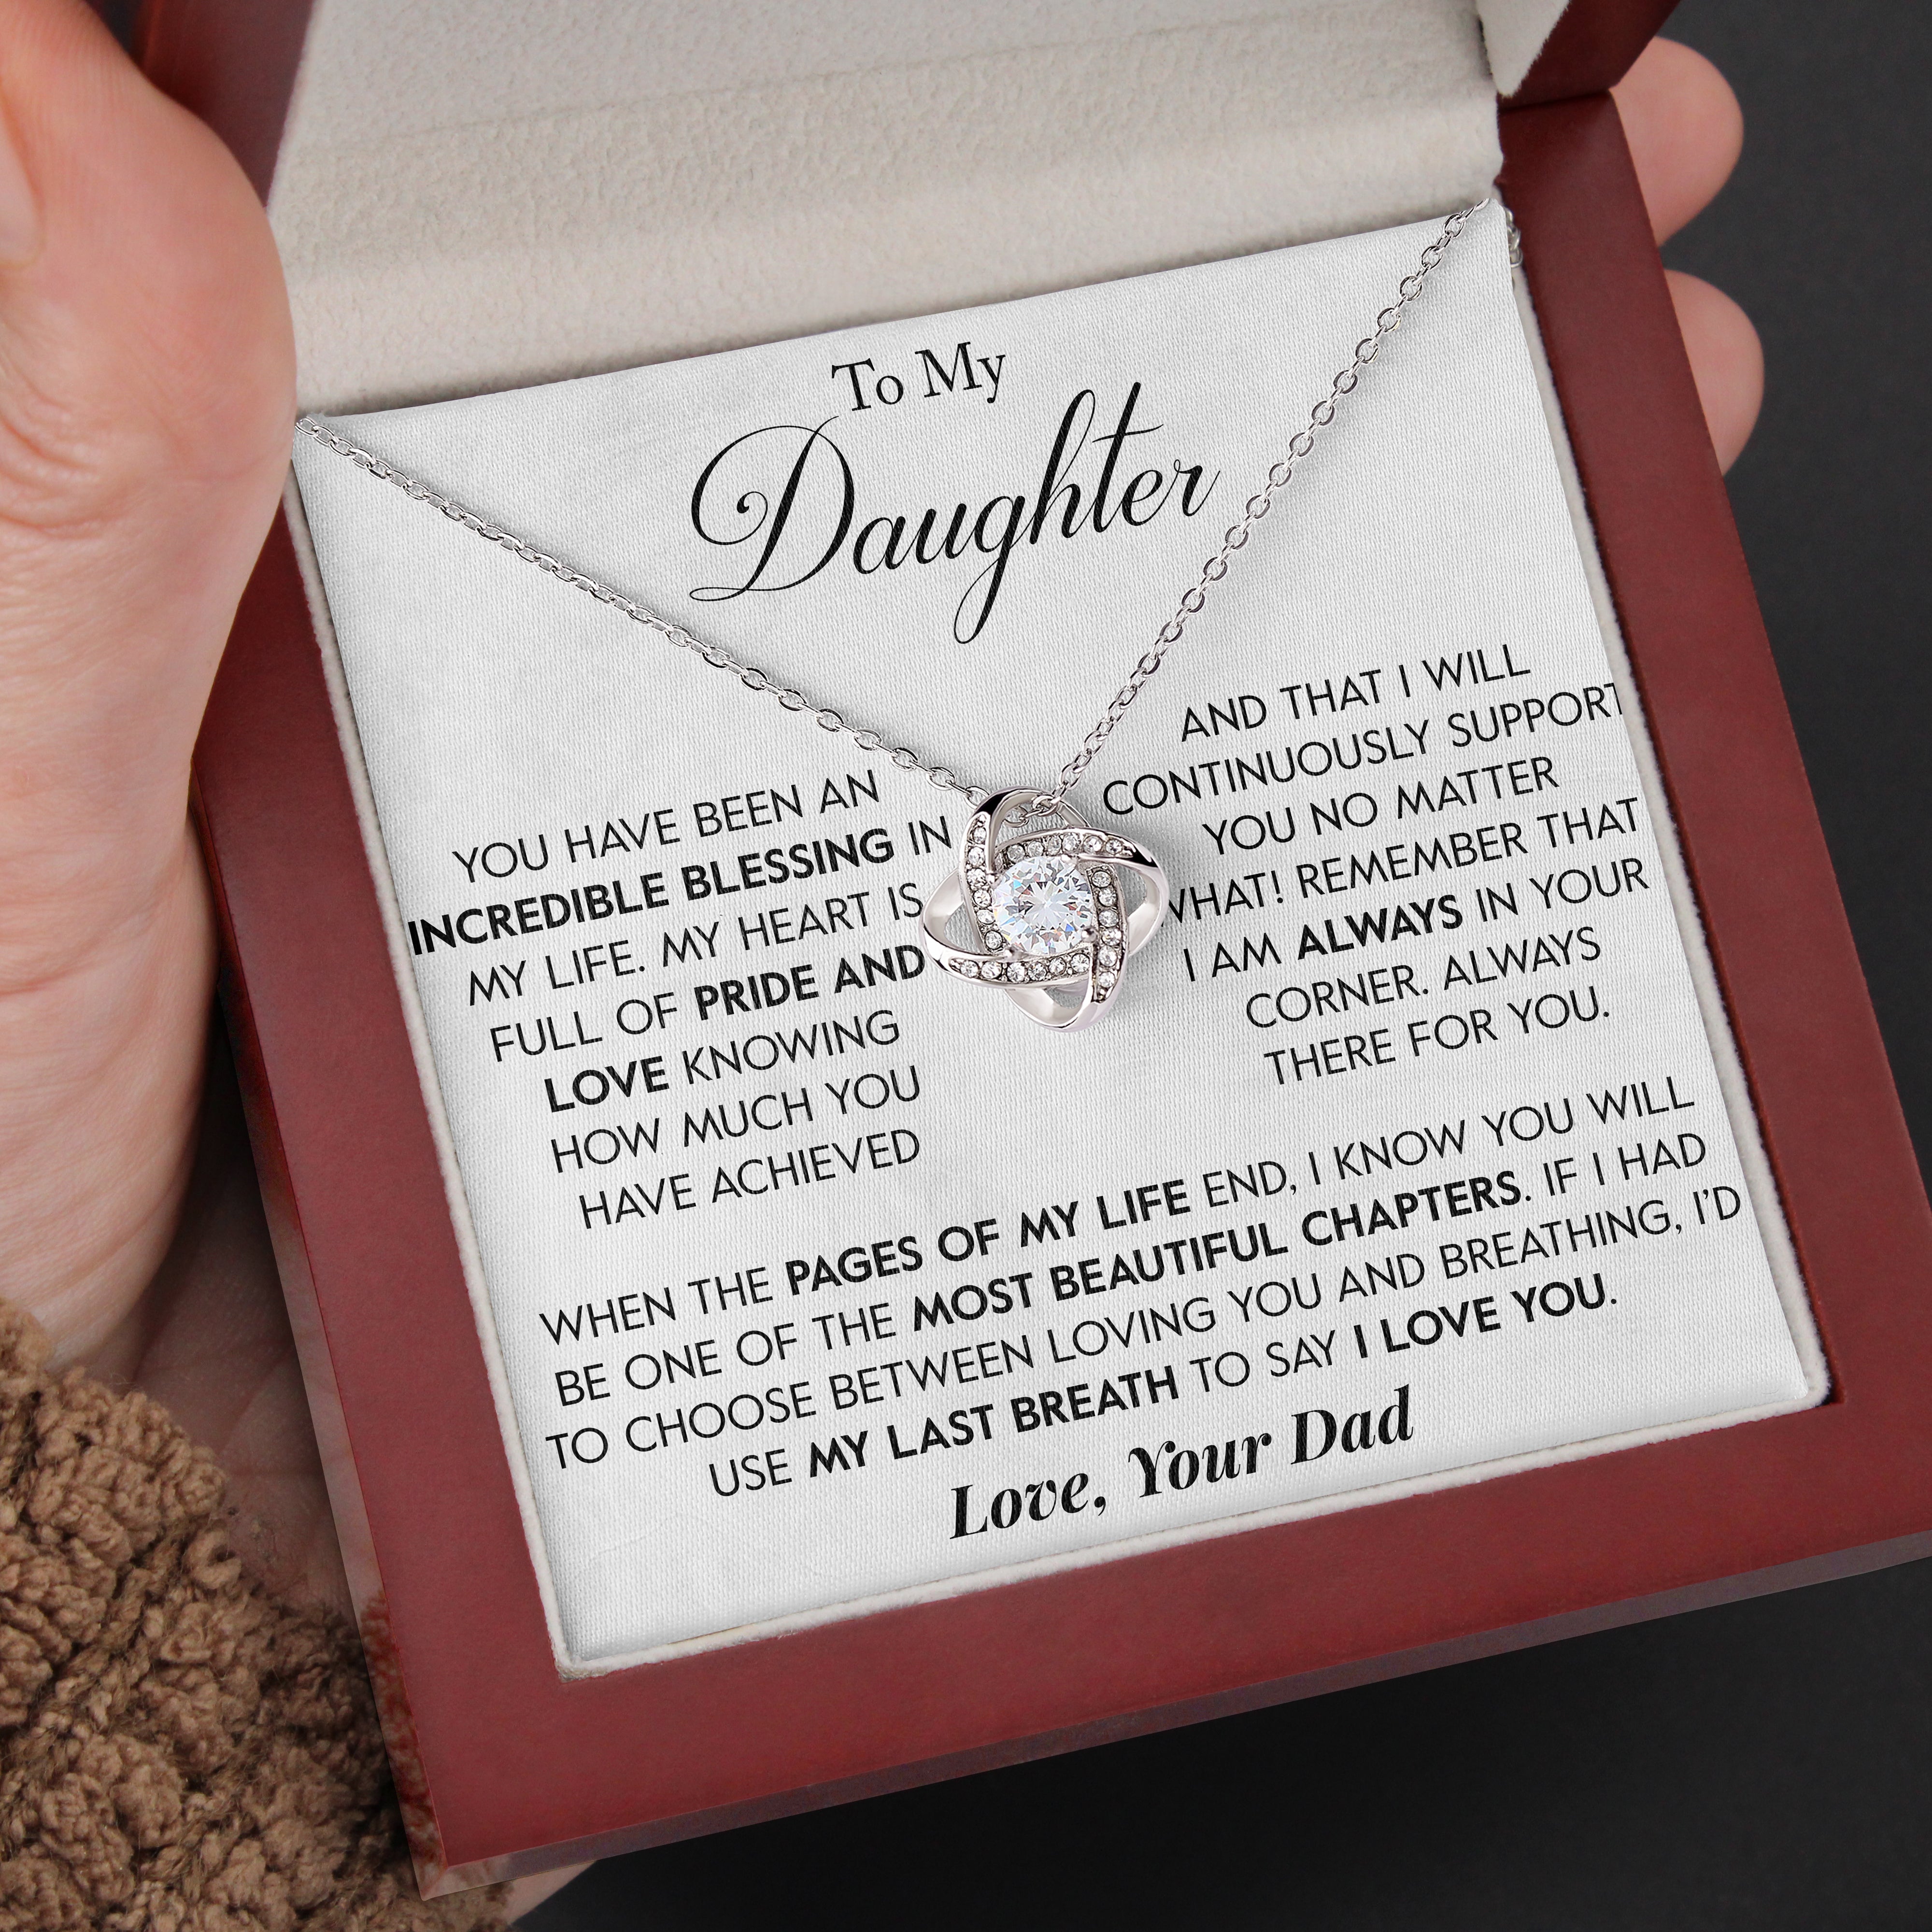 To My Daughter | "Incredible Blessing" | Love Knot Necklace